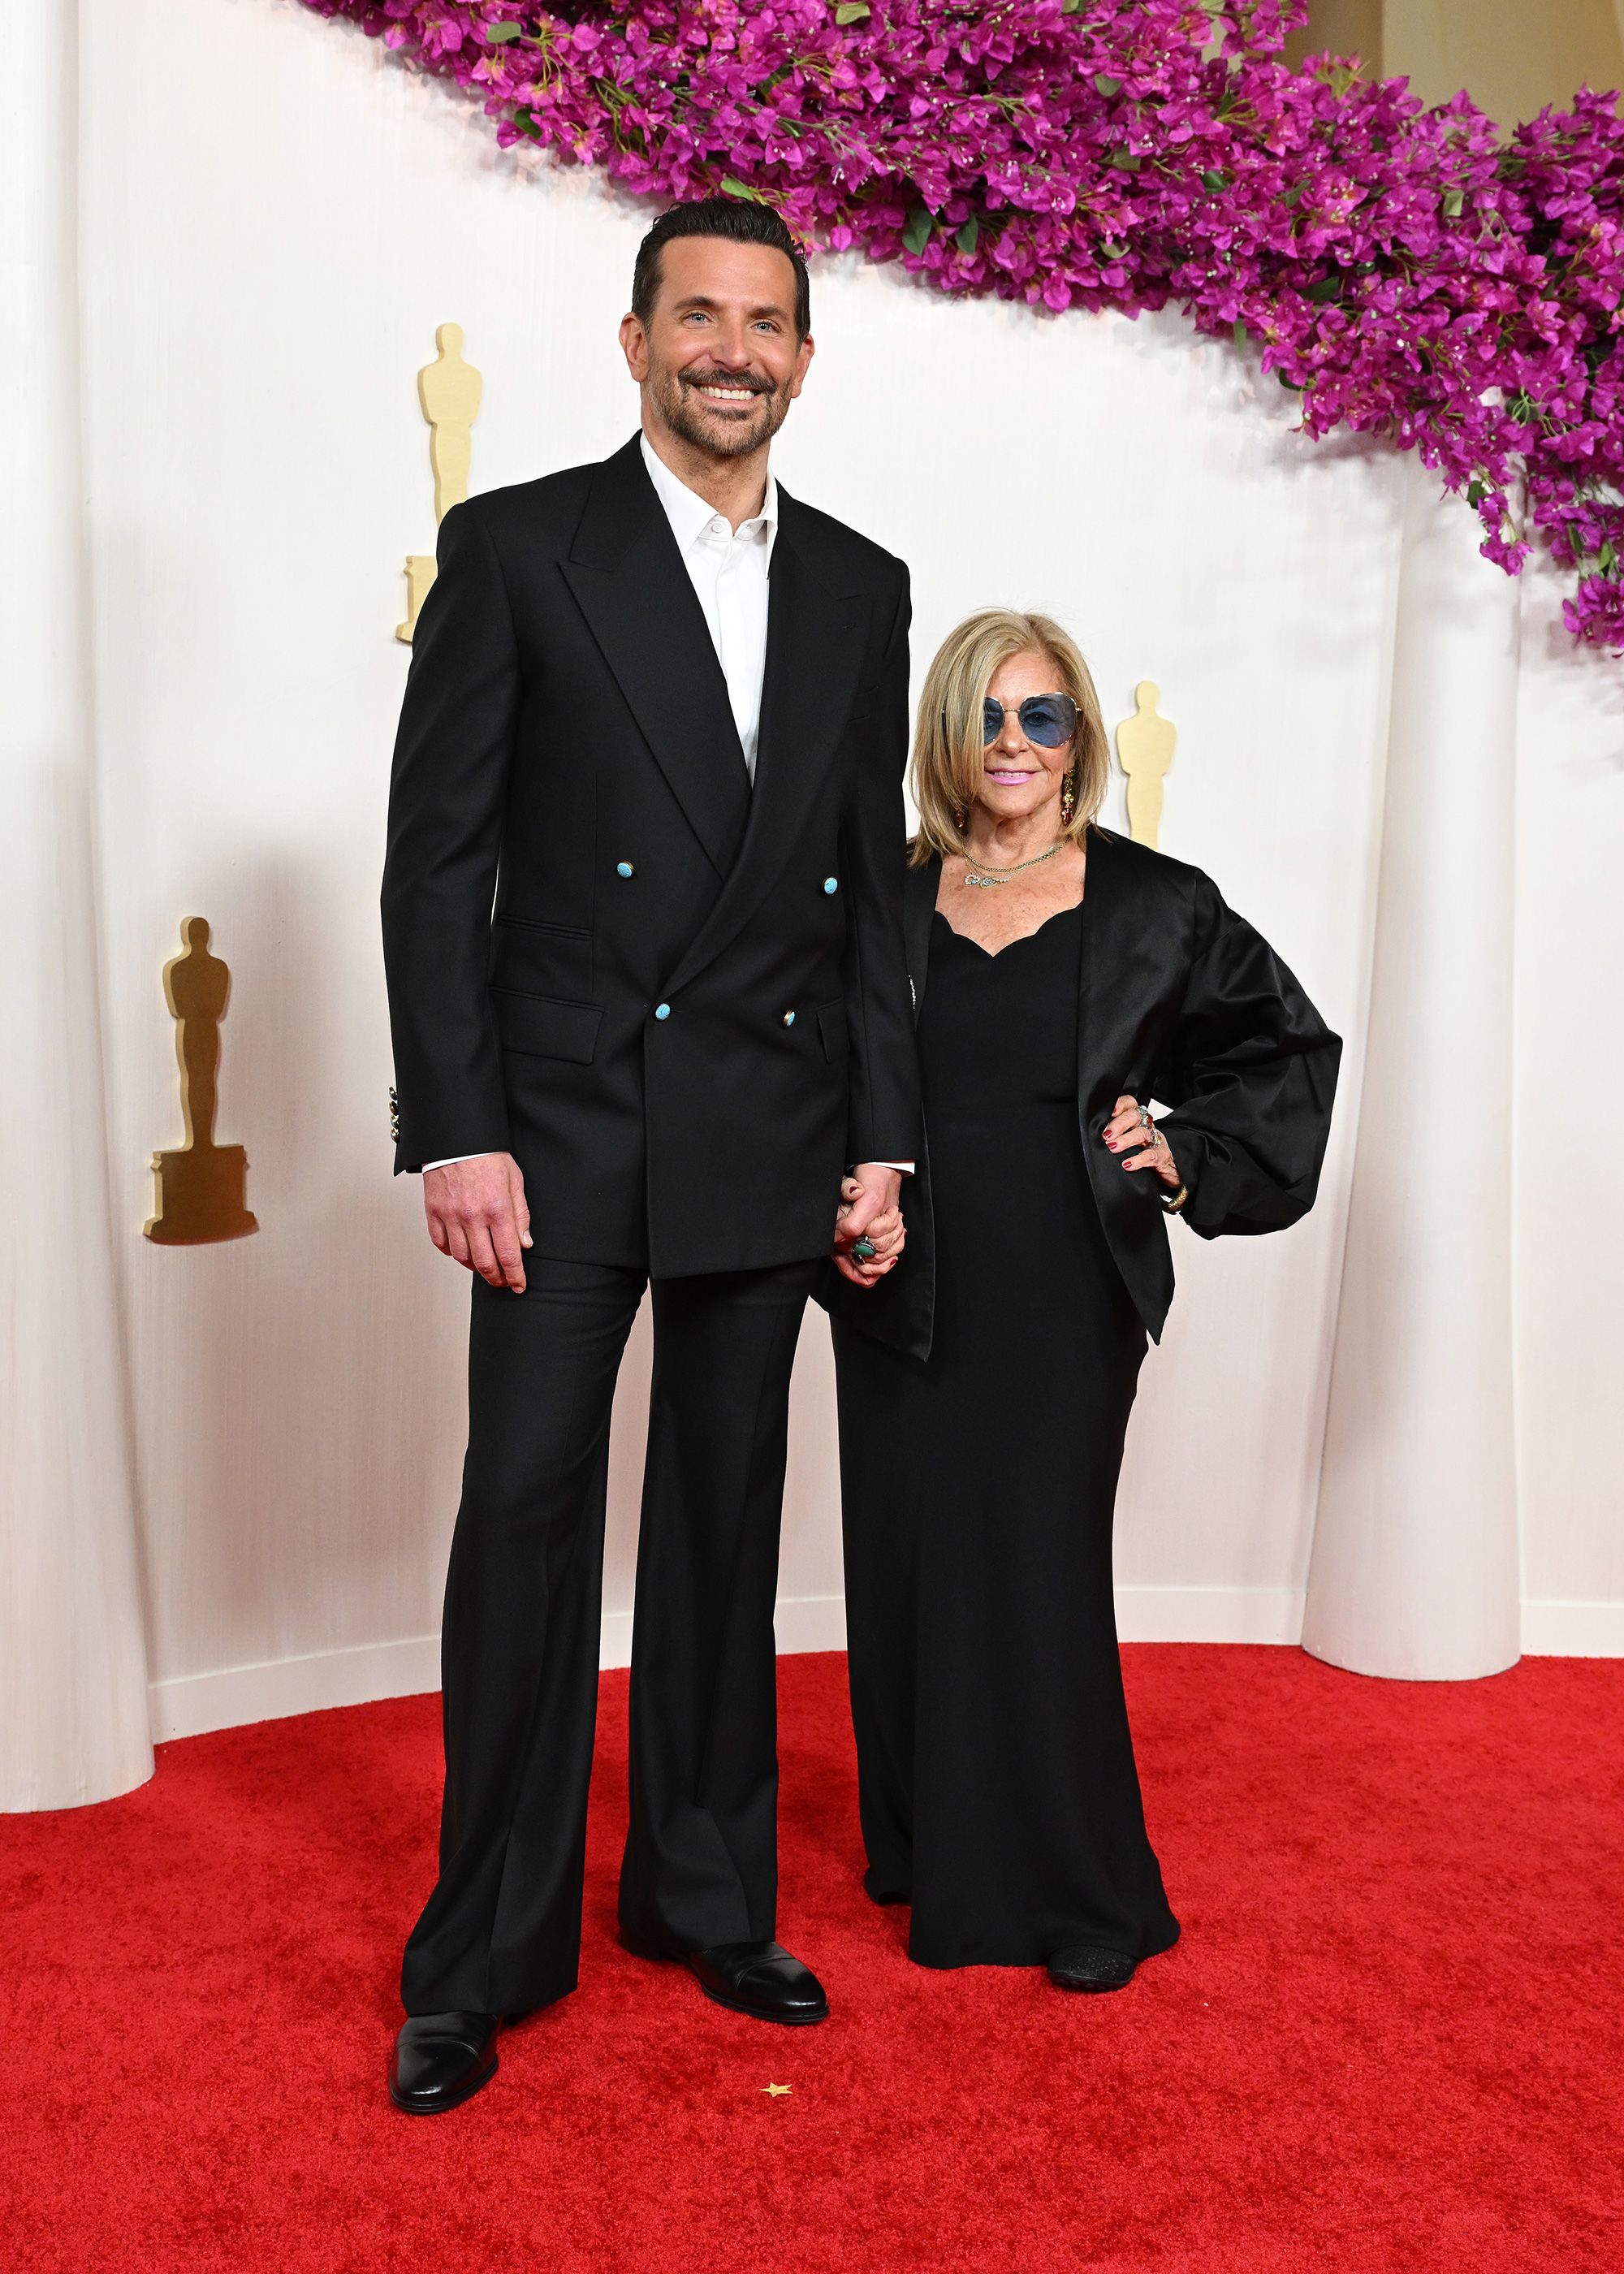 Best Actor nominee Bradley Cooper kept it classic with a custom Louis Vuitton suit and Tambour watch.  Cooper arrived with his mother, Gloria Campano.